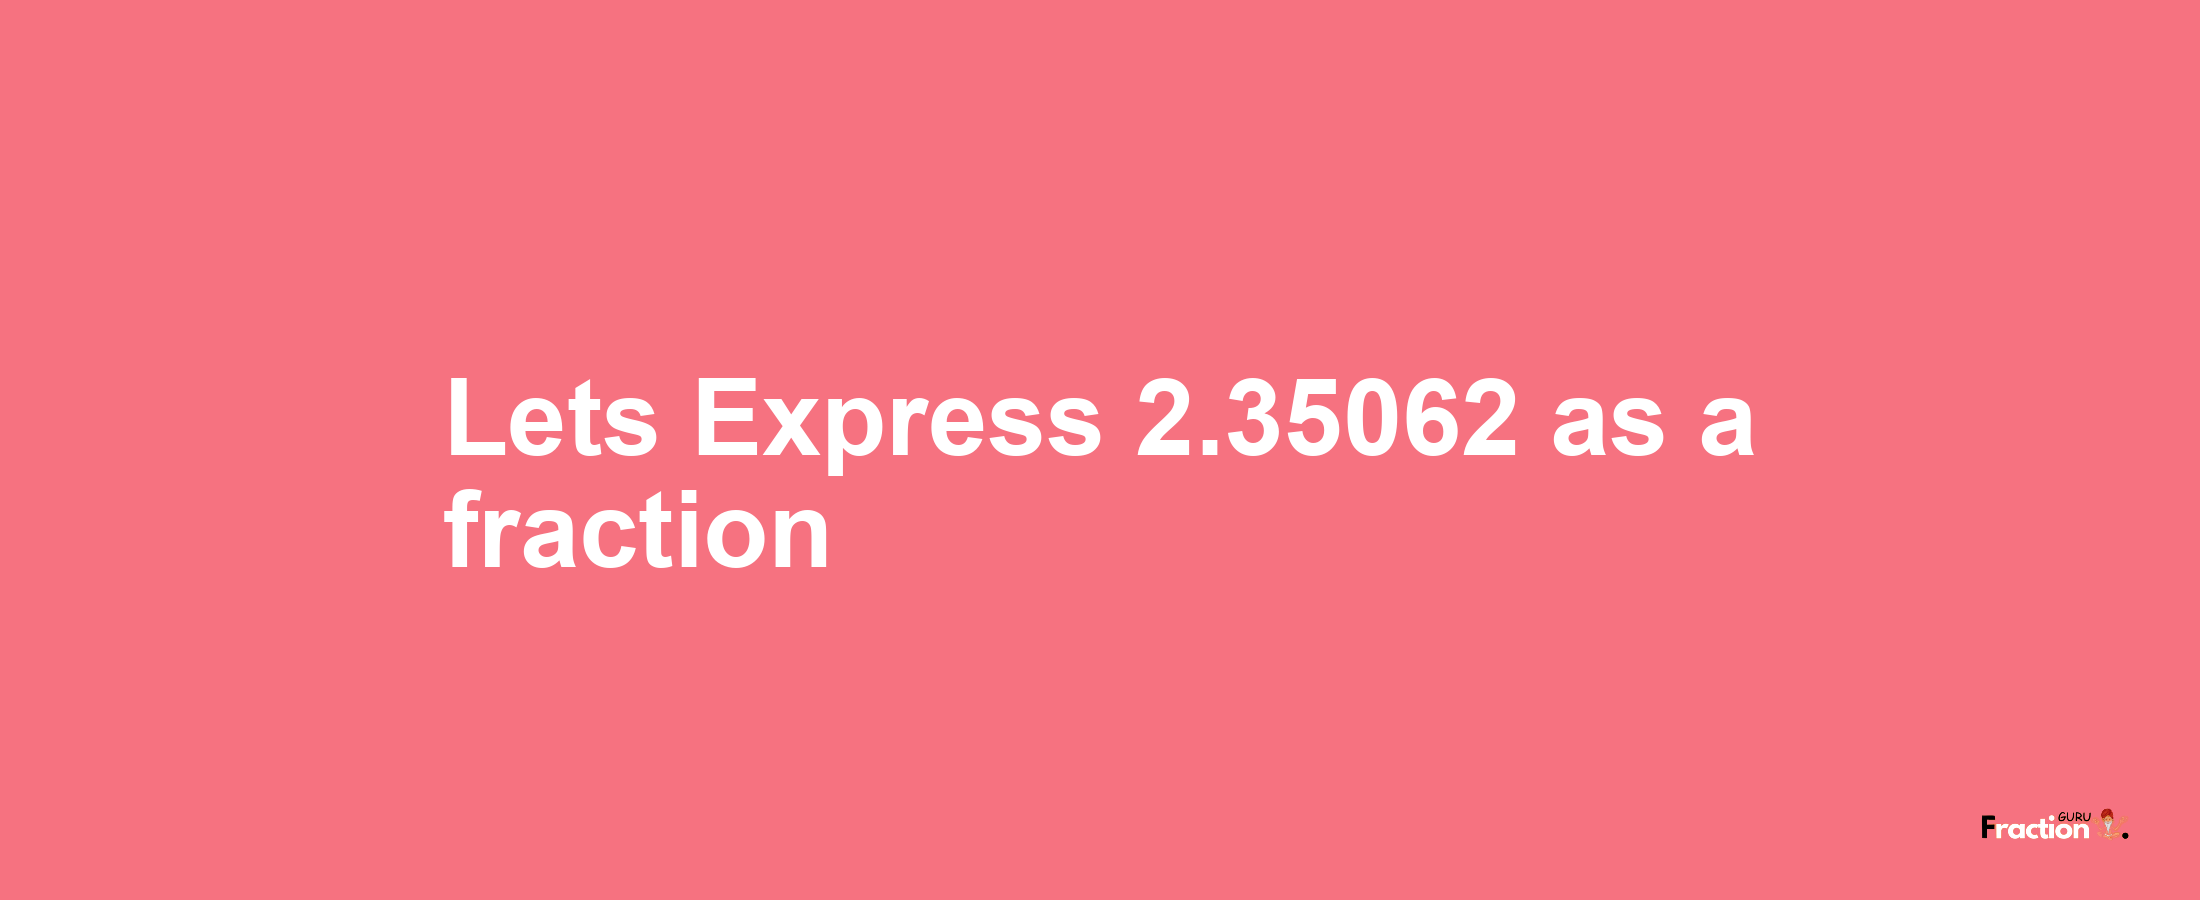 Lets Express 2.35062 as afraction